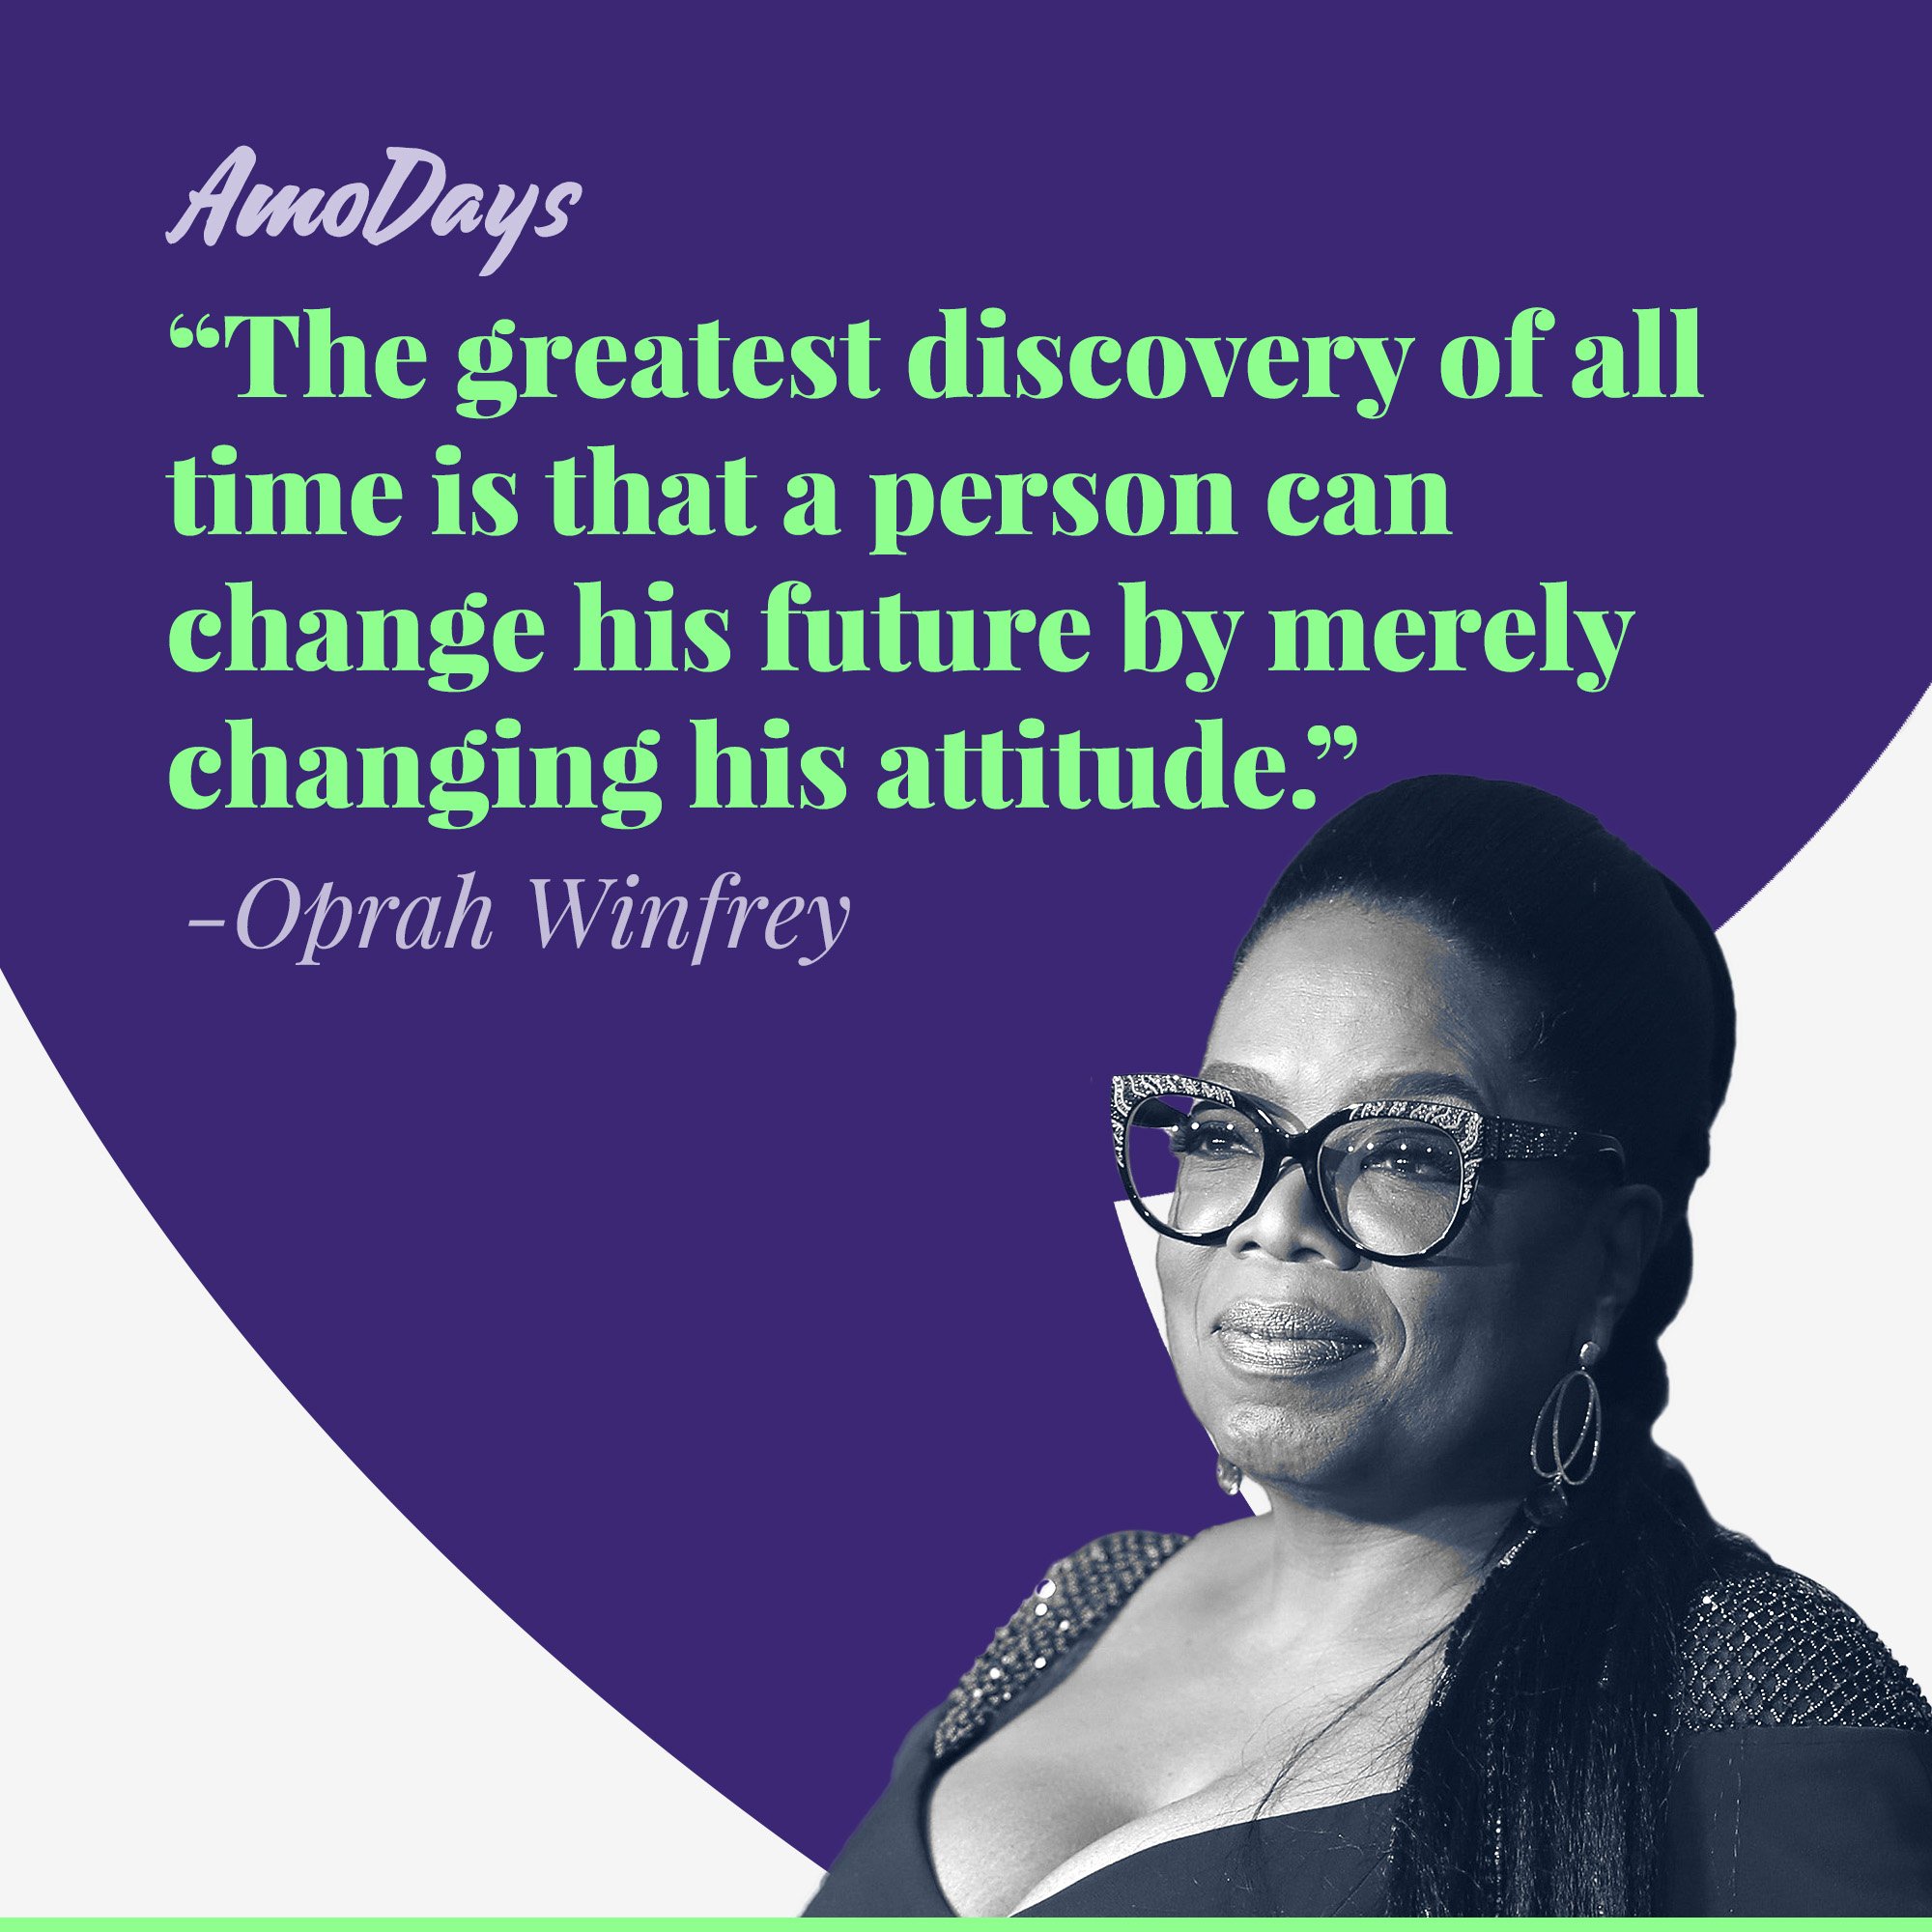 Oprah Winfrey's quote: "The greatest discovery of all time is that a person can change his future by merely changing his attitude." | Image: AmoDays